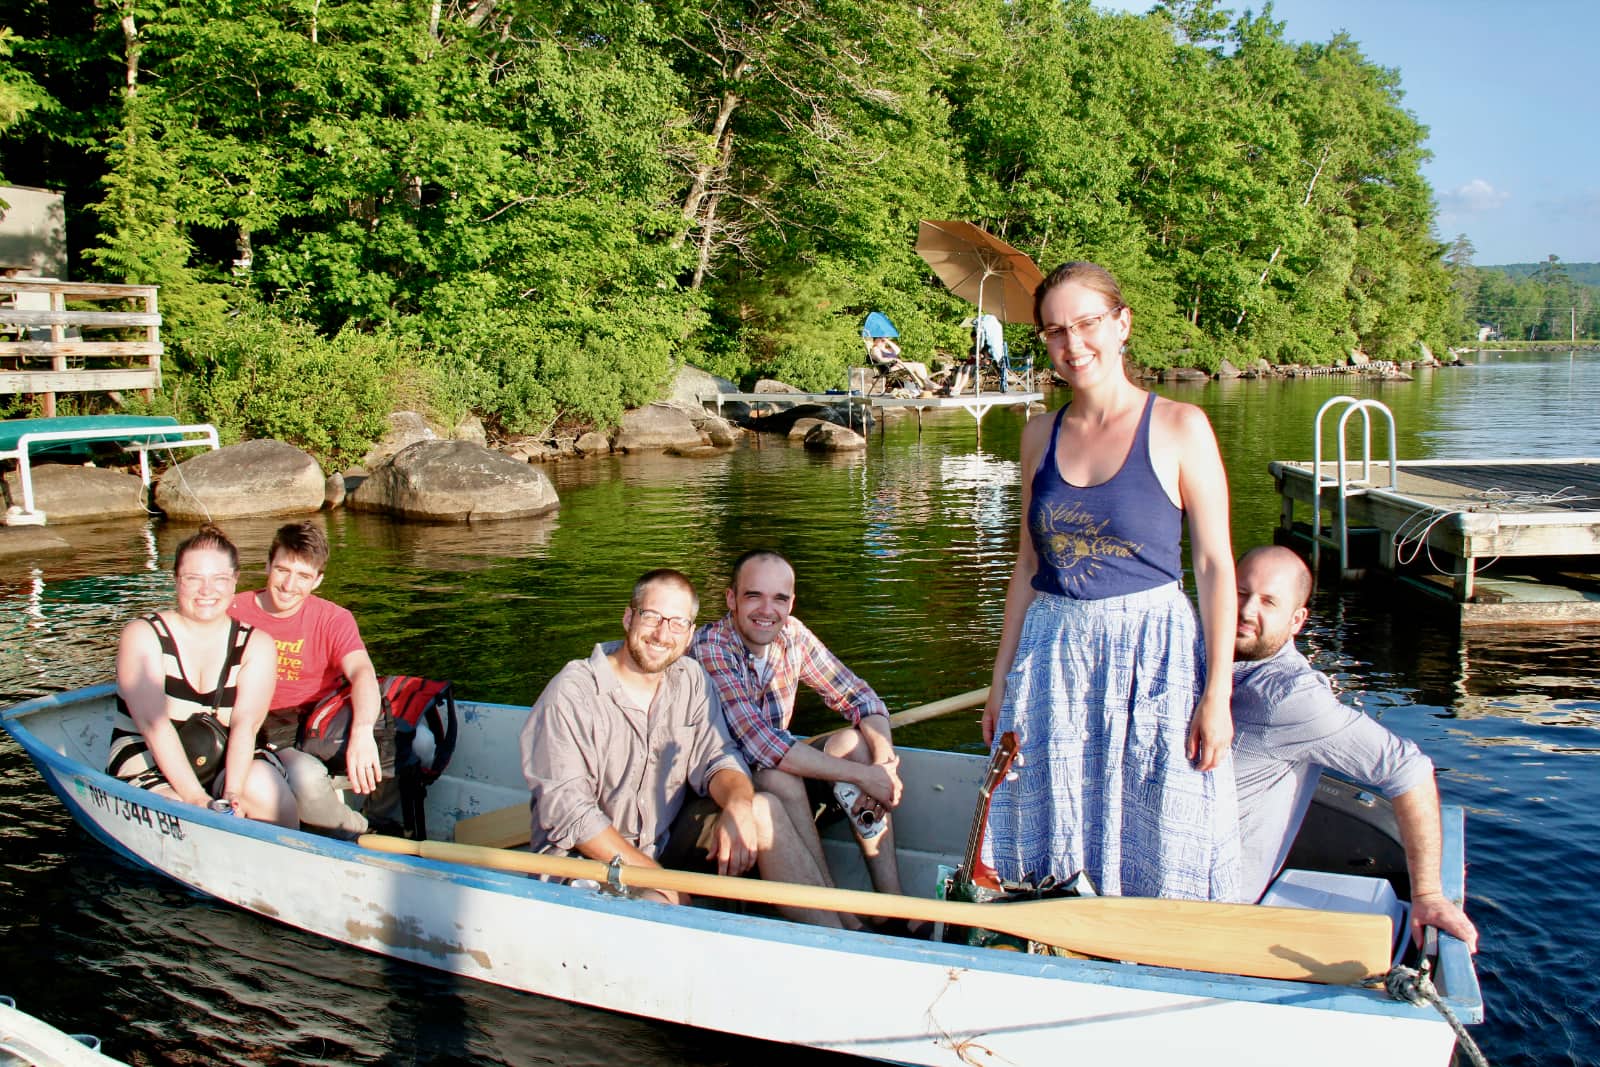 Group of people sitting in row boat